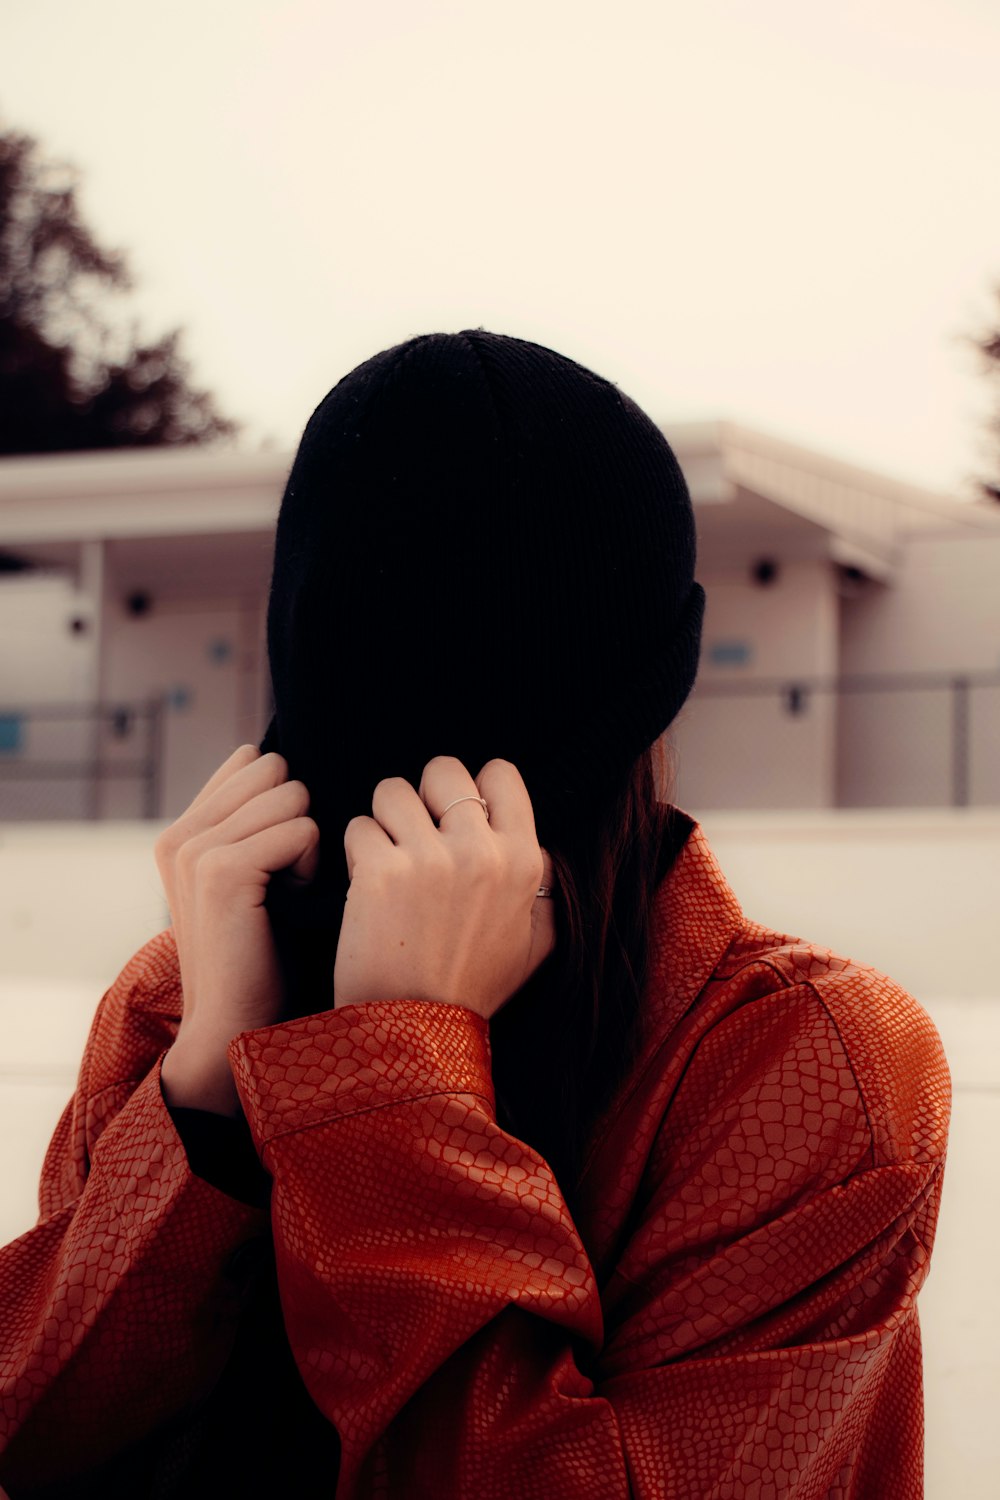 woman in red knit sweater covering face with black knit cap